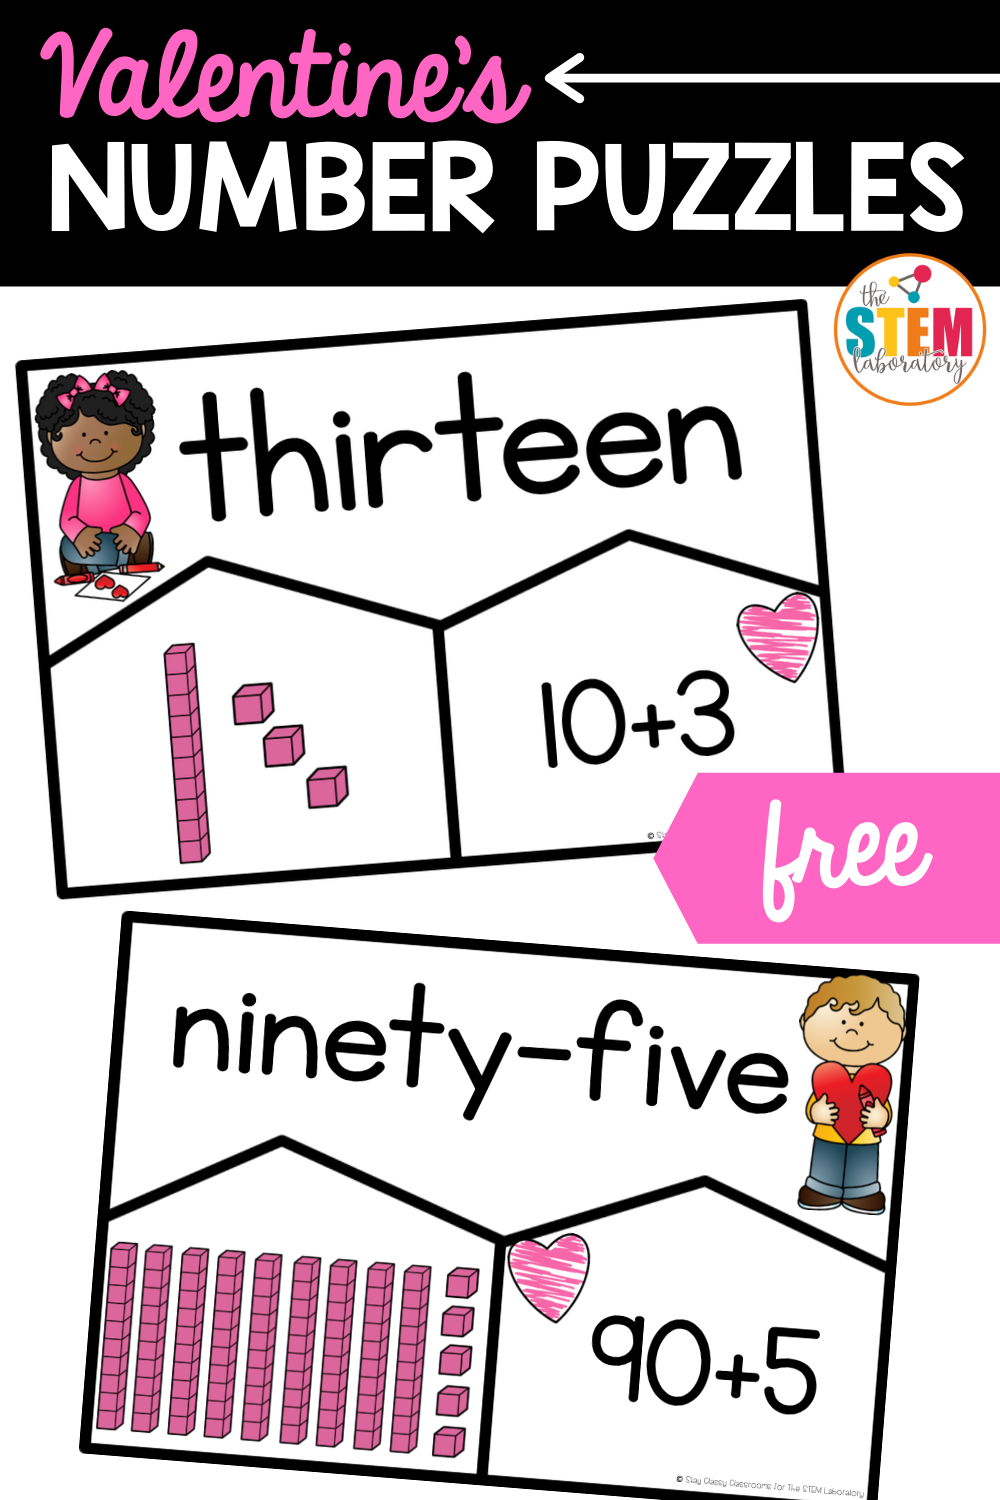 Sweet Treats Number Puzzles